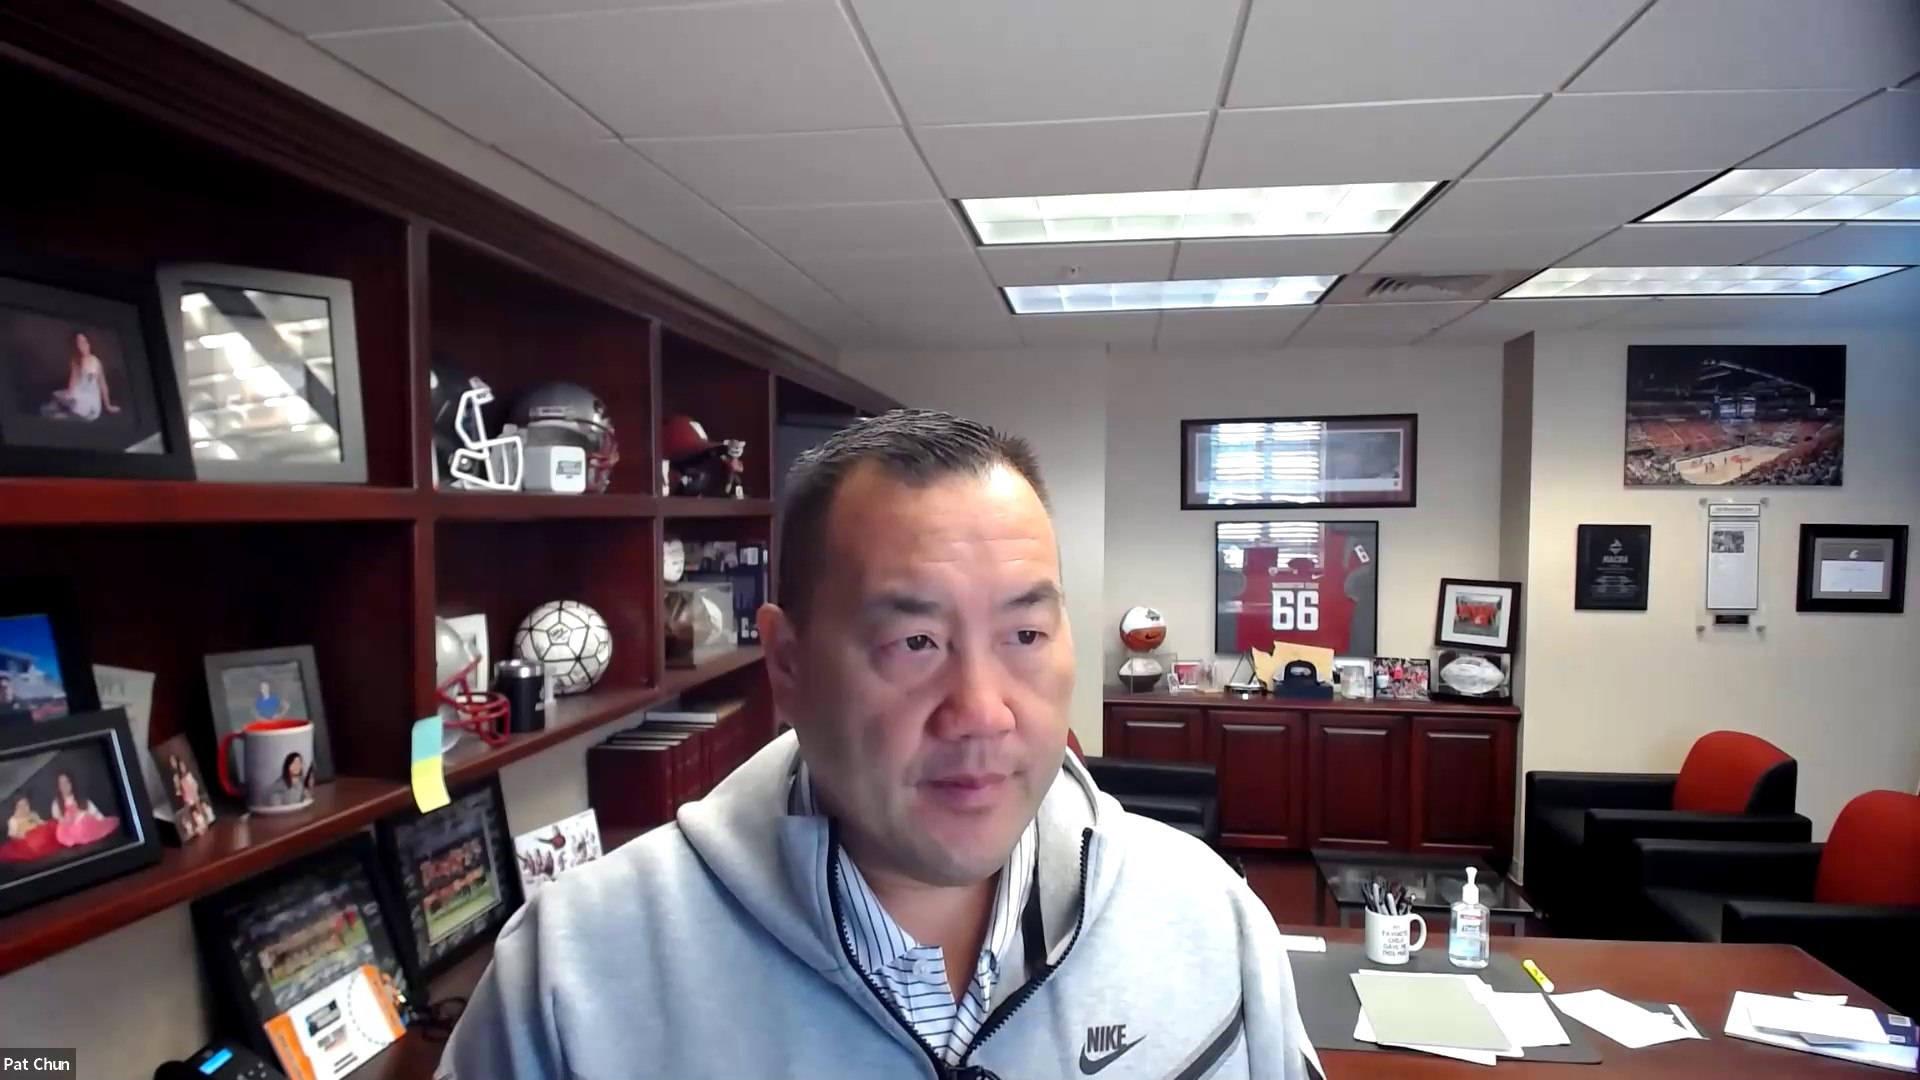 WSU Athletic Director Pat Chun discusses the push to keep the Pac-12 together after several teams head to other conferences.